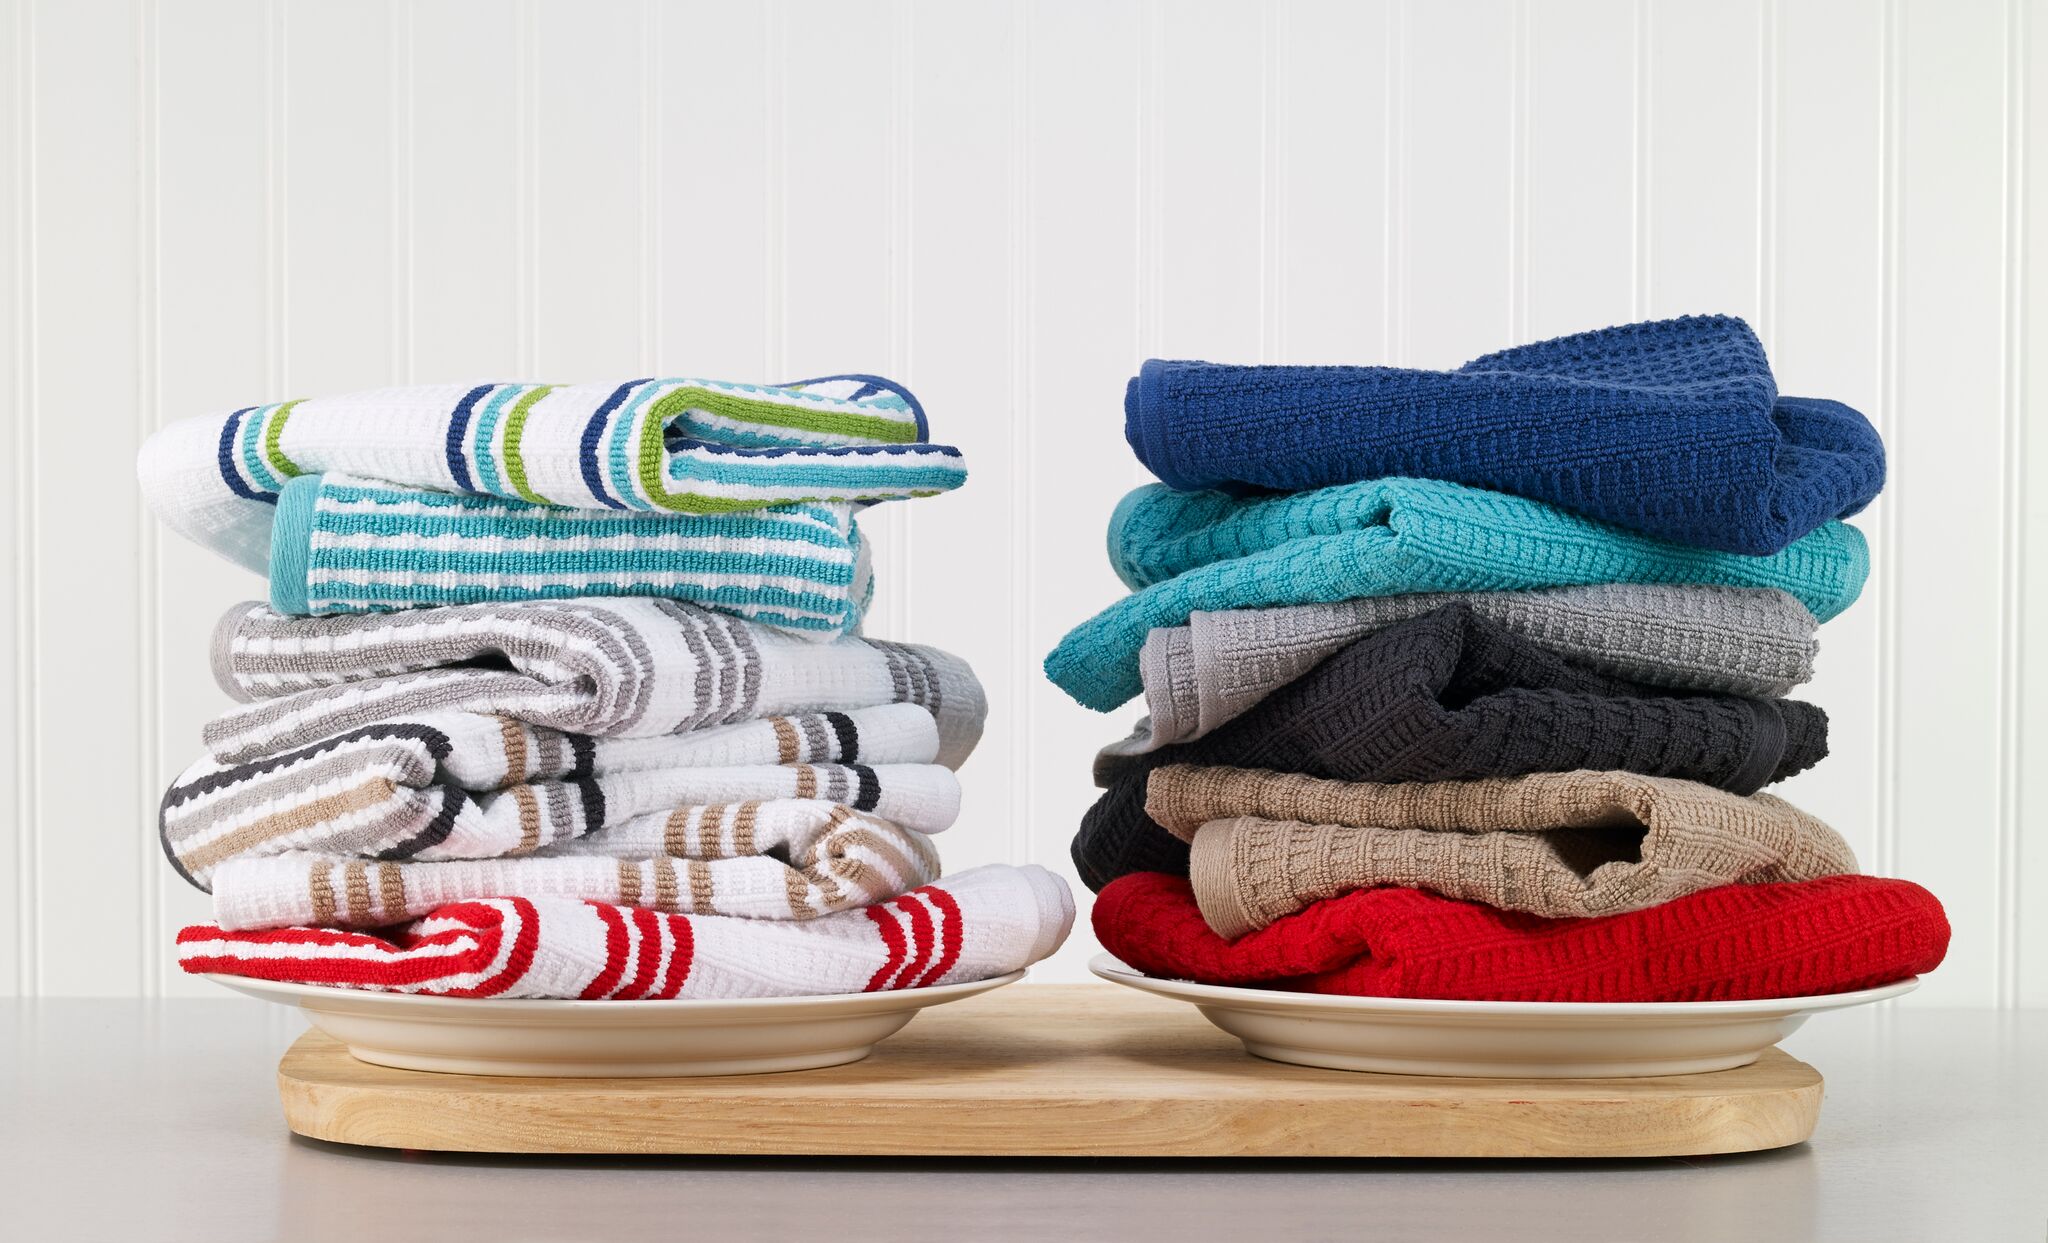 https://www.johnritz.com/wp-content/uploads/2018/06/T-fal-Solid-and-Striped-Kitchen-Towel.jpeg